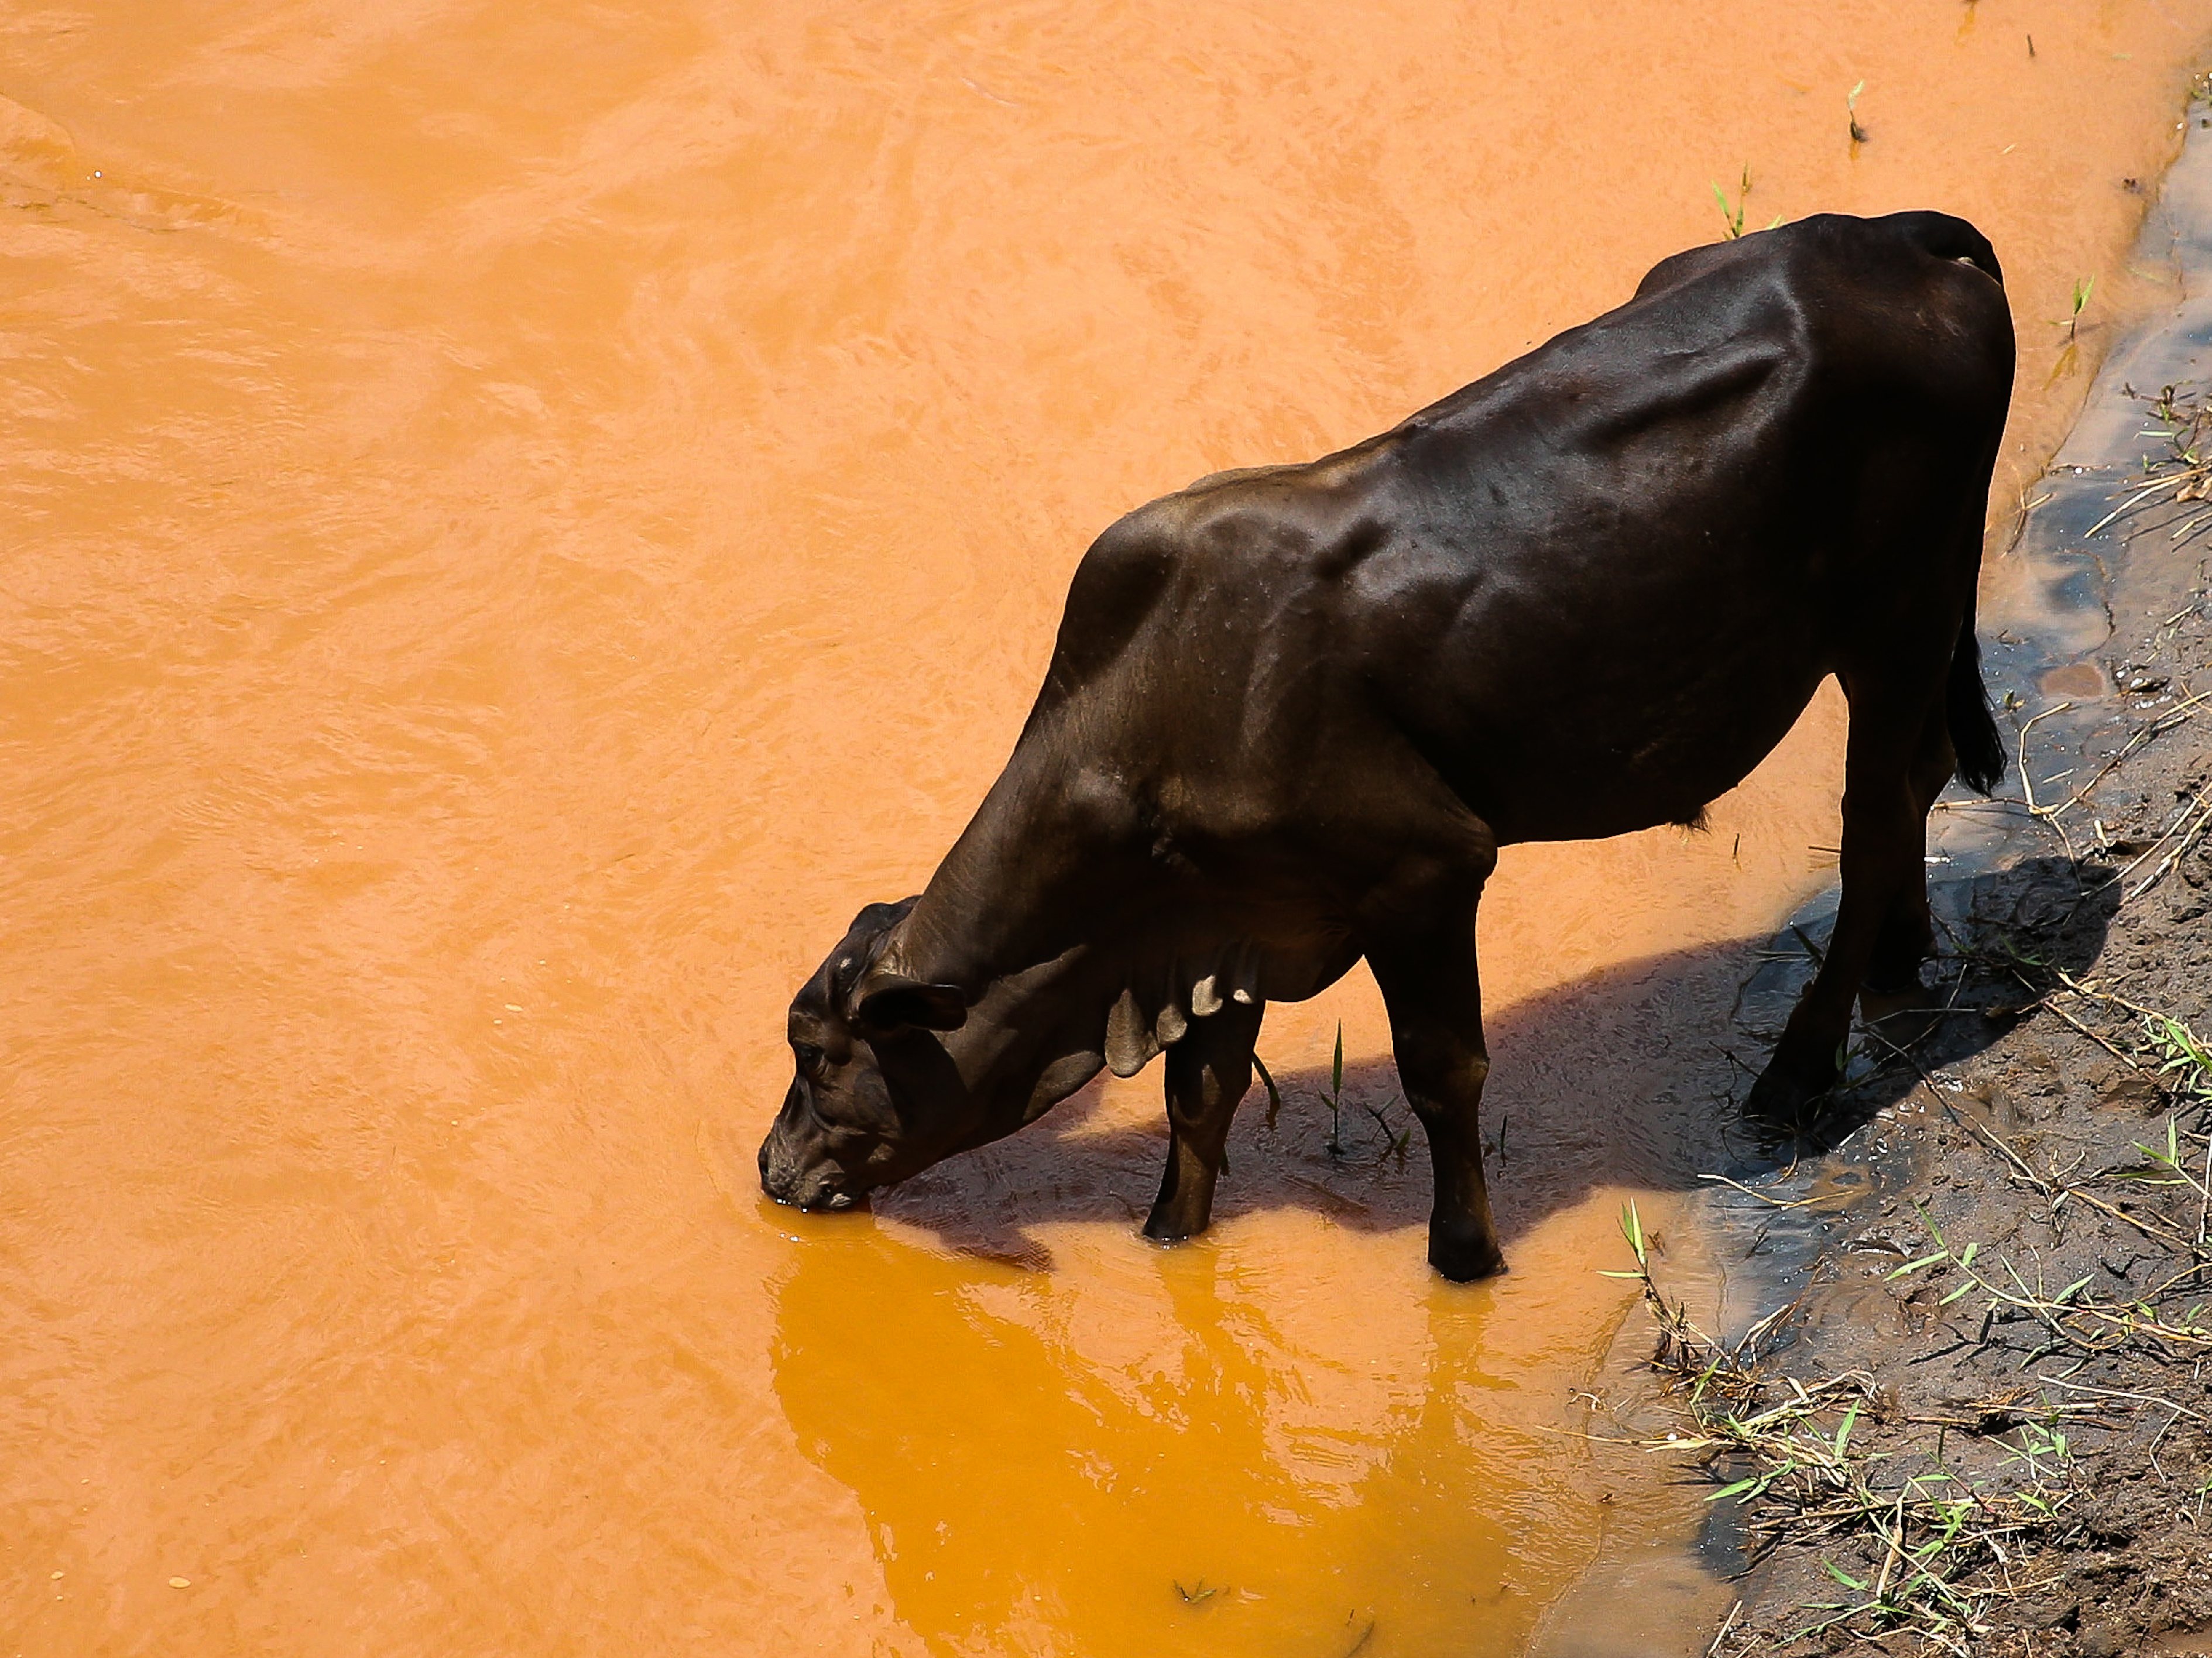 Animal Drinks from Polluted River